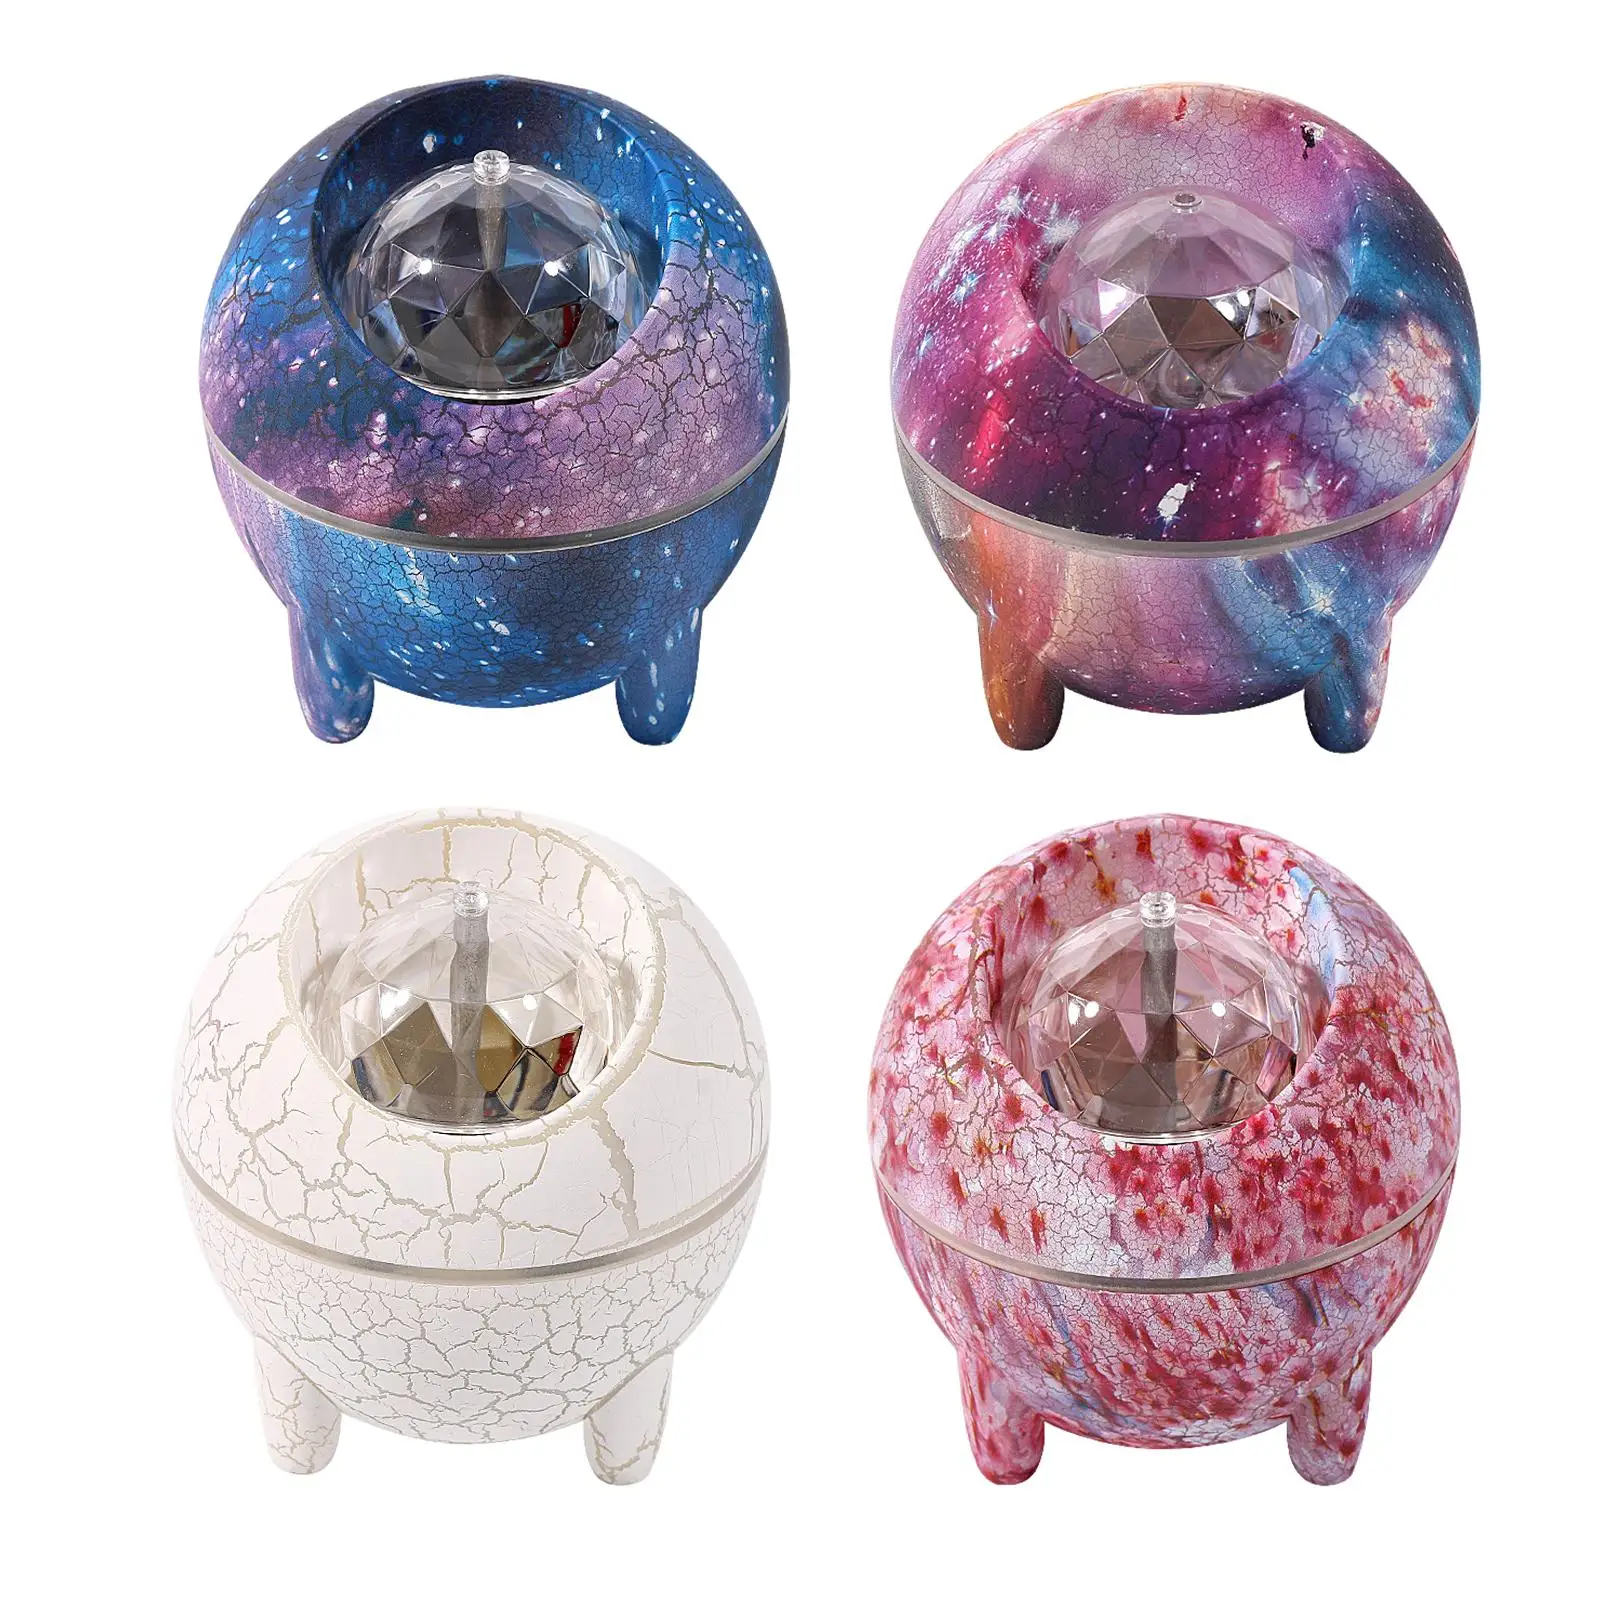 Star Sky Projection Lamp Starry Night Egg Shape Remote Nightlamp Rechargeable for Birthday Gift Room Decor Bedroom Children Kids